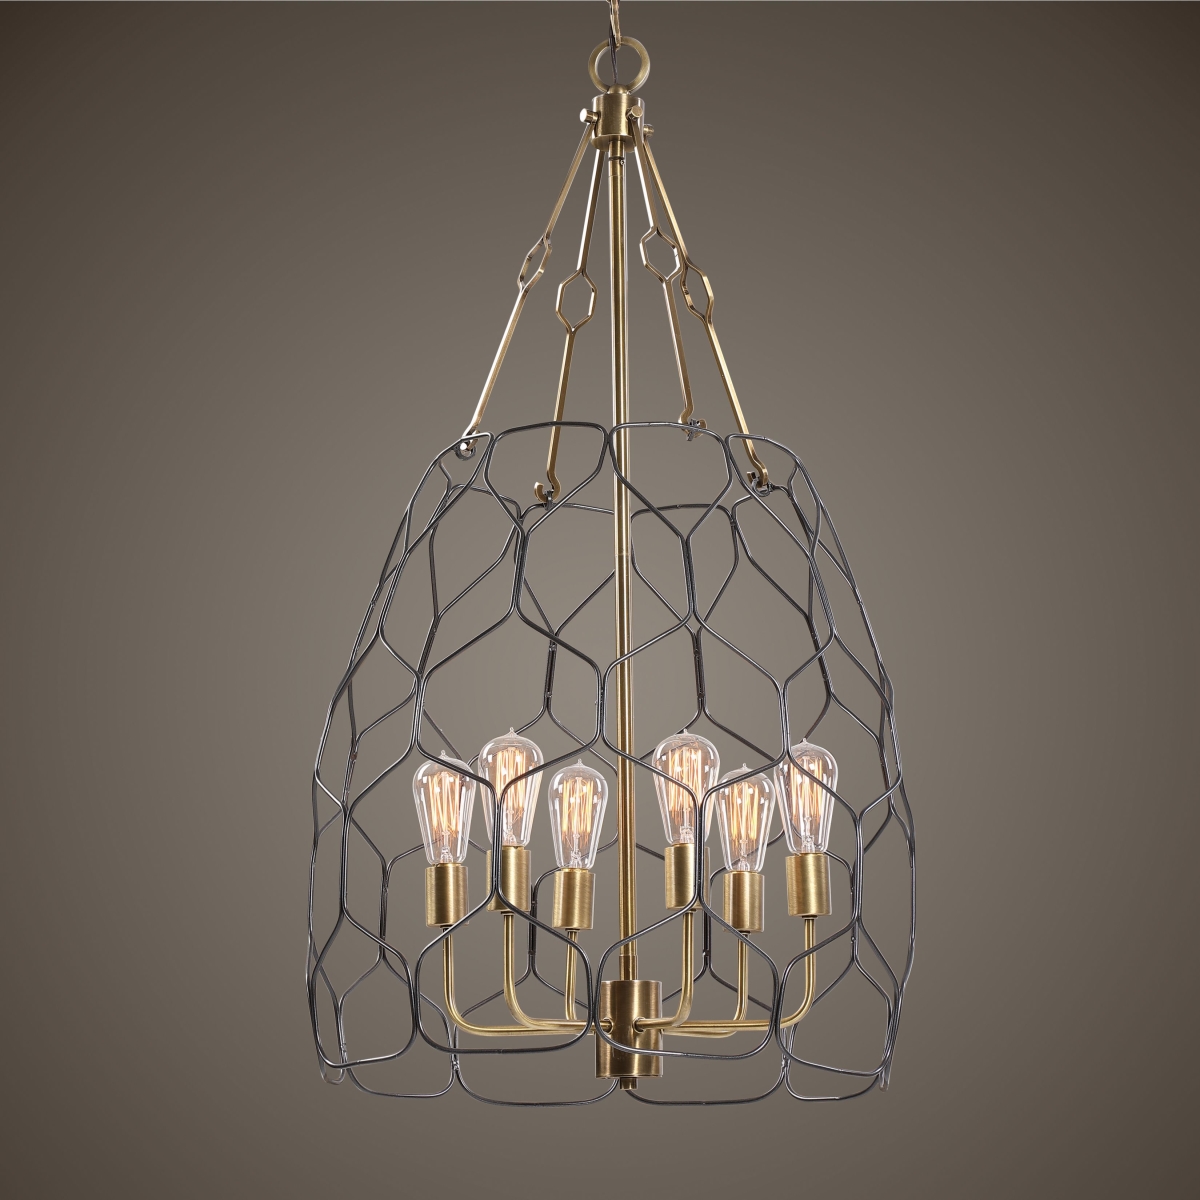 Picture of 212 Main 21537 25 x 25 x 27 in. Halstead 6 Light Farmhouse Pendant